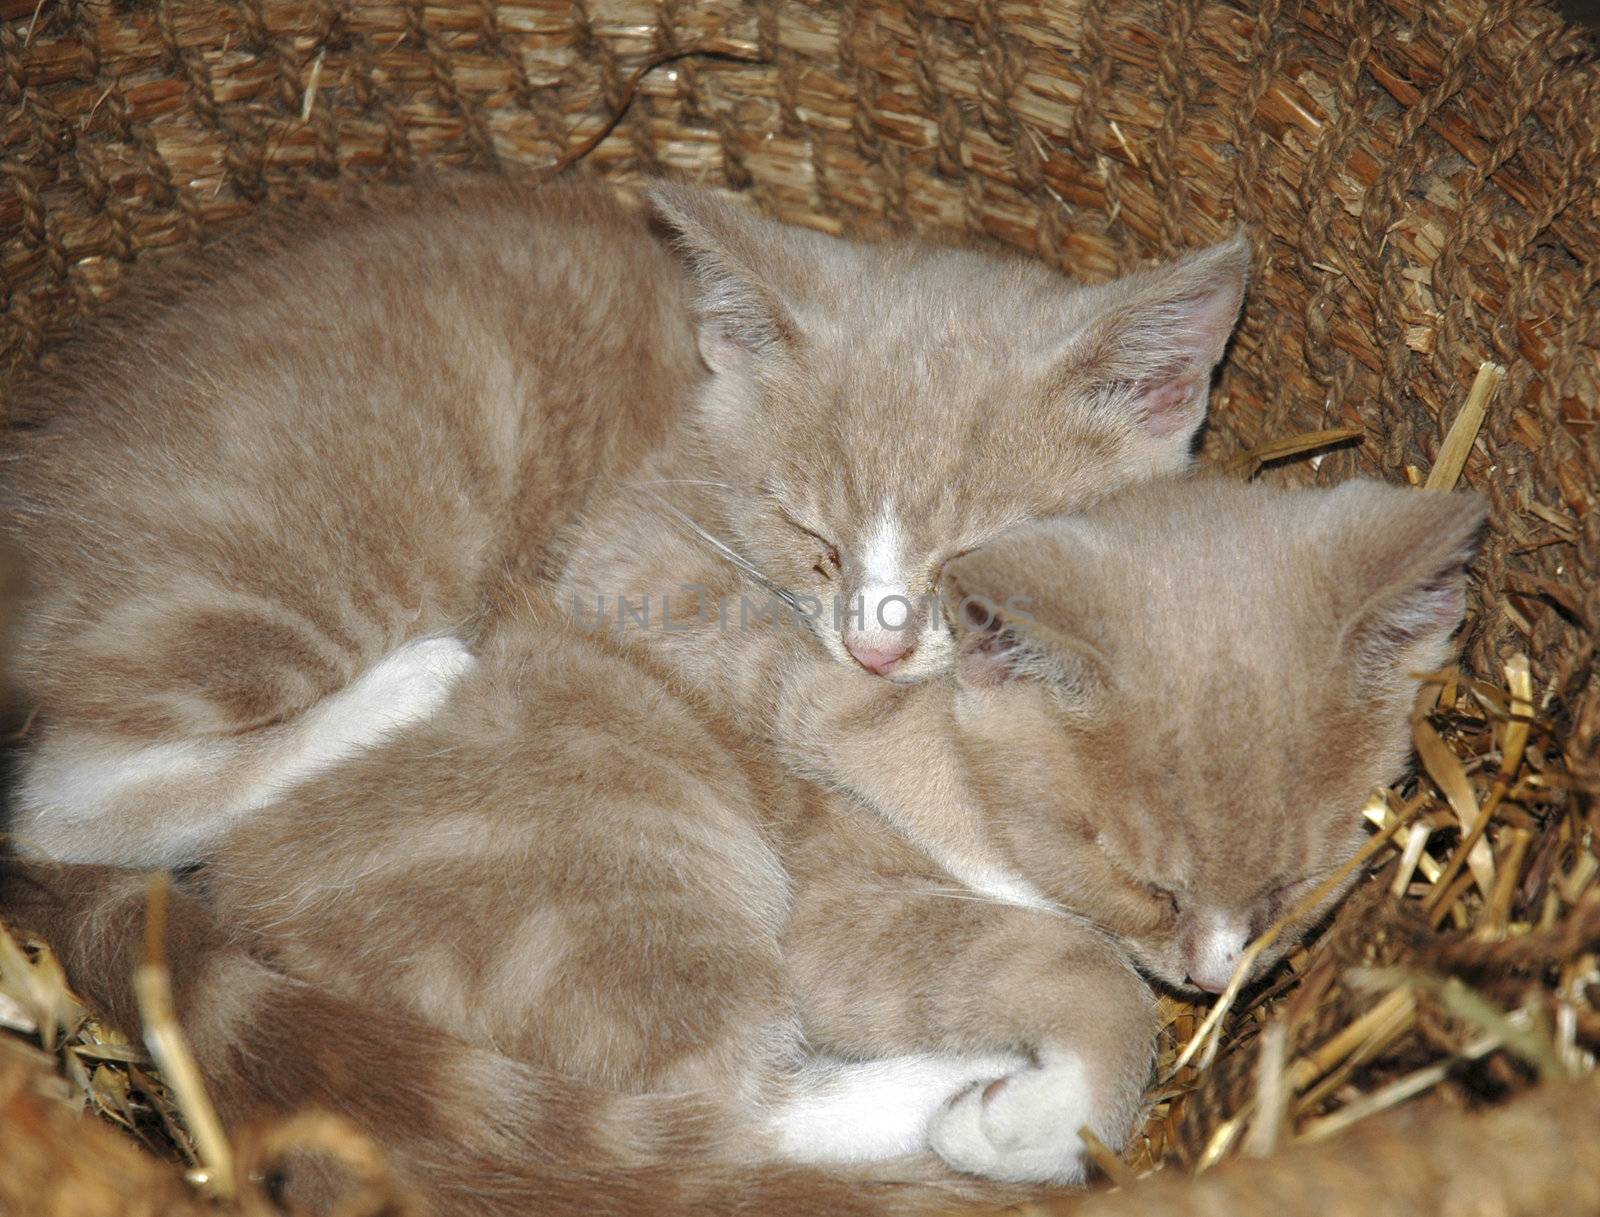 Two cute young kittens sleeping in a basket